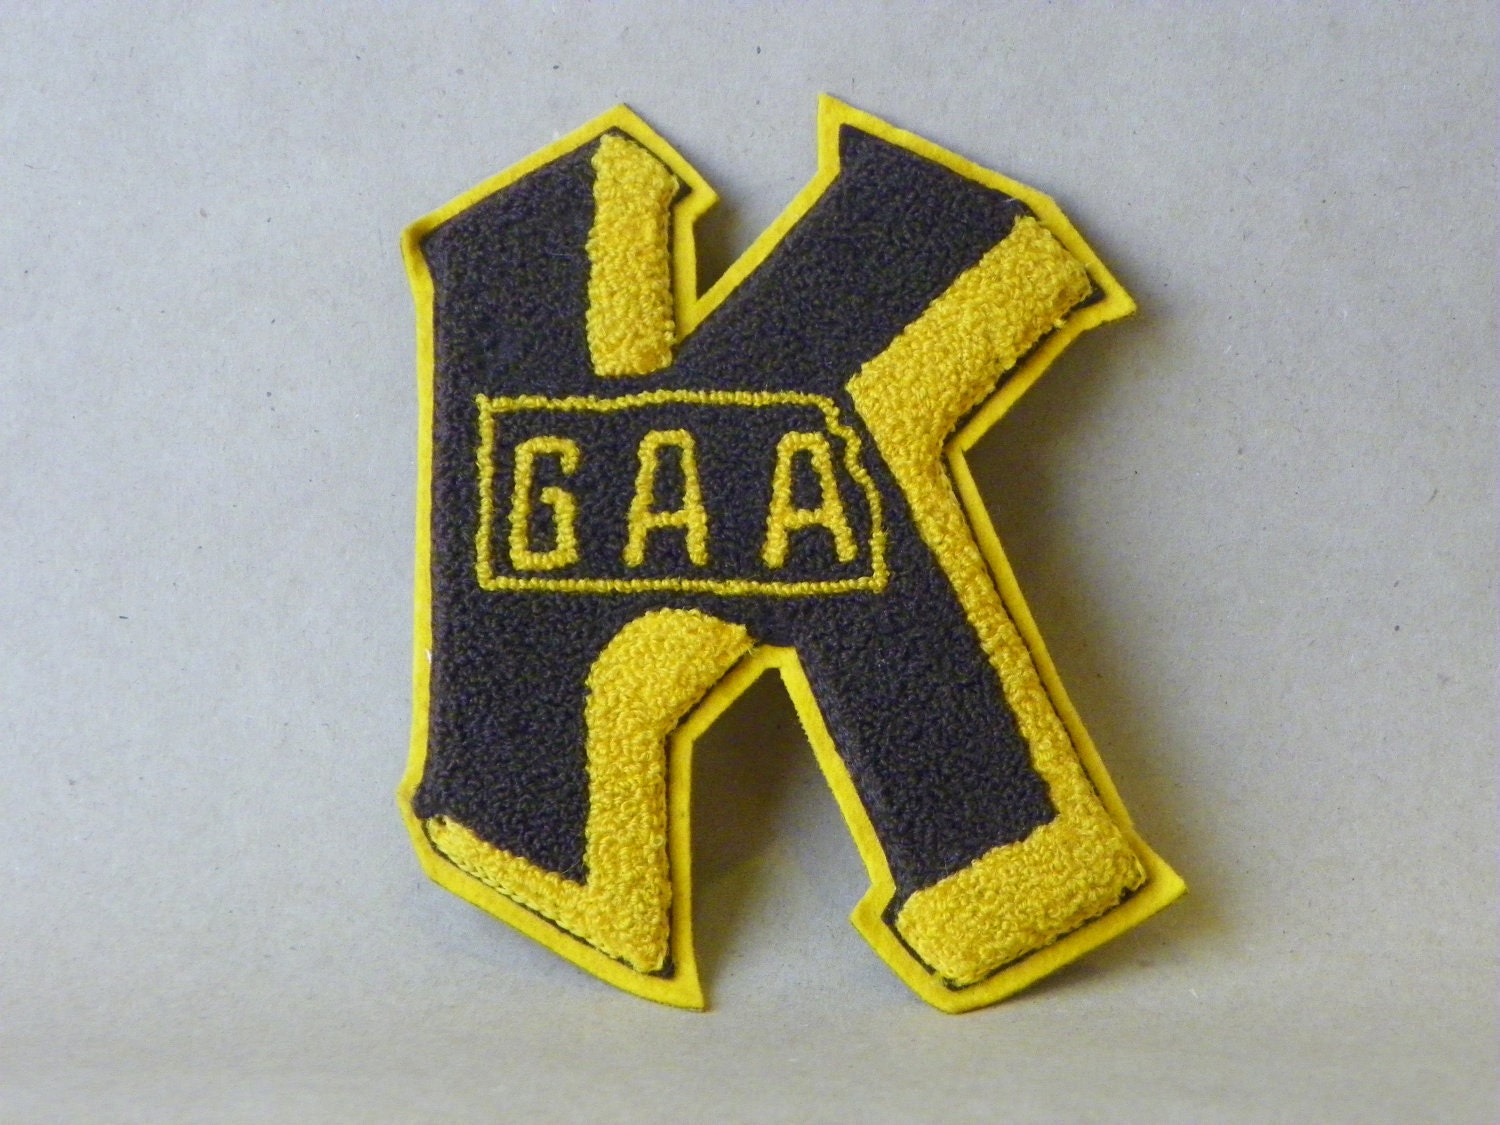 We got spirit yes we do, we got spirit how about you... not without your lettermans patch - anEstateSale